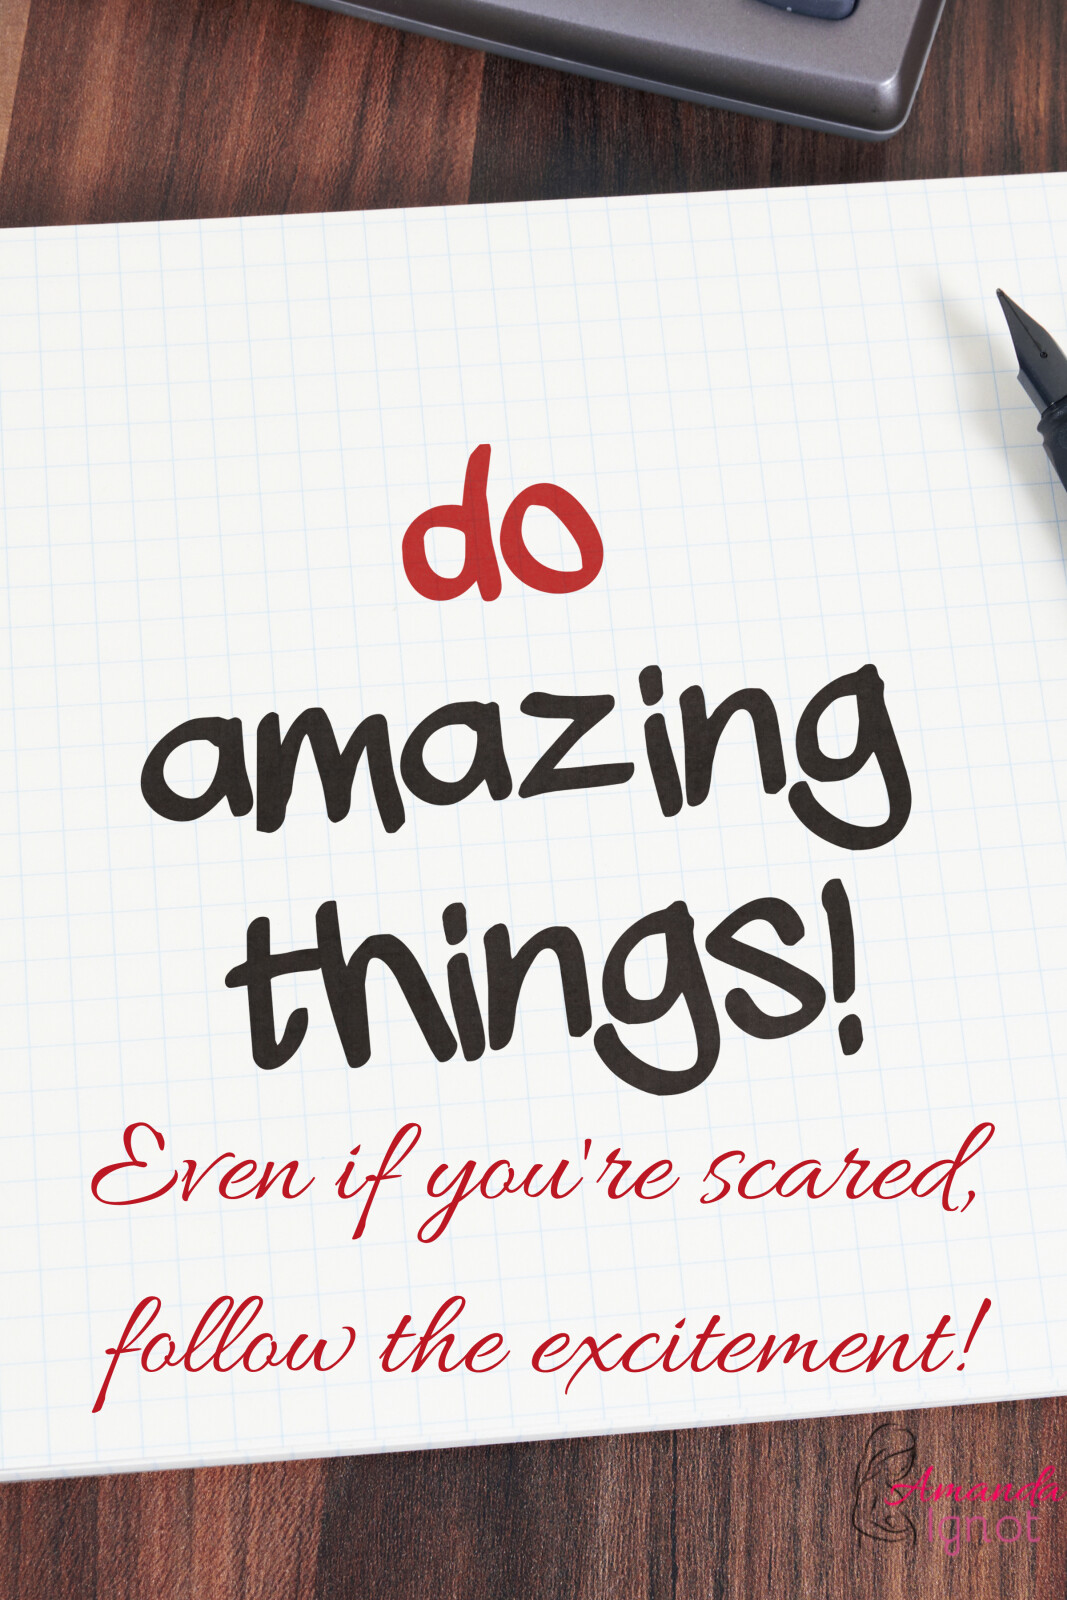 Doing things scared and excited…..